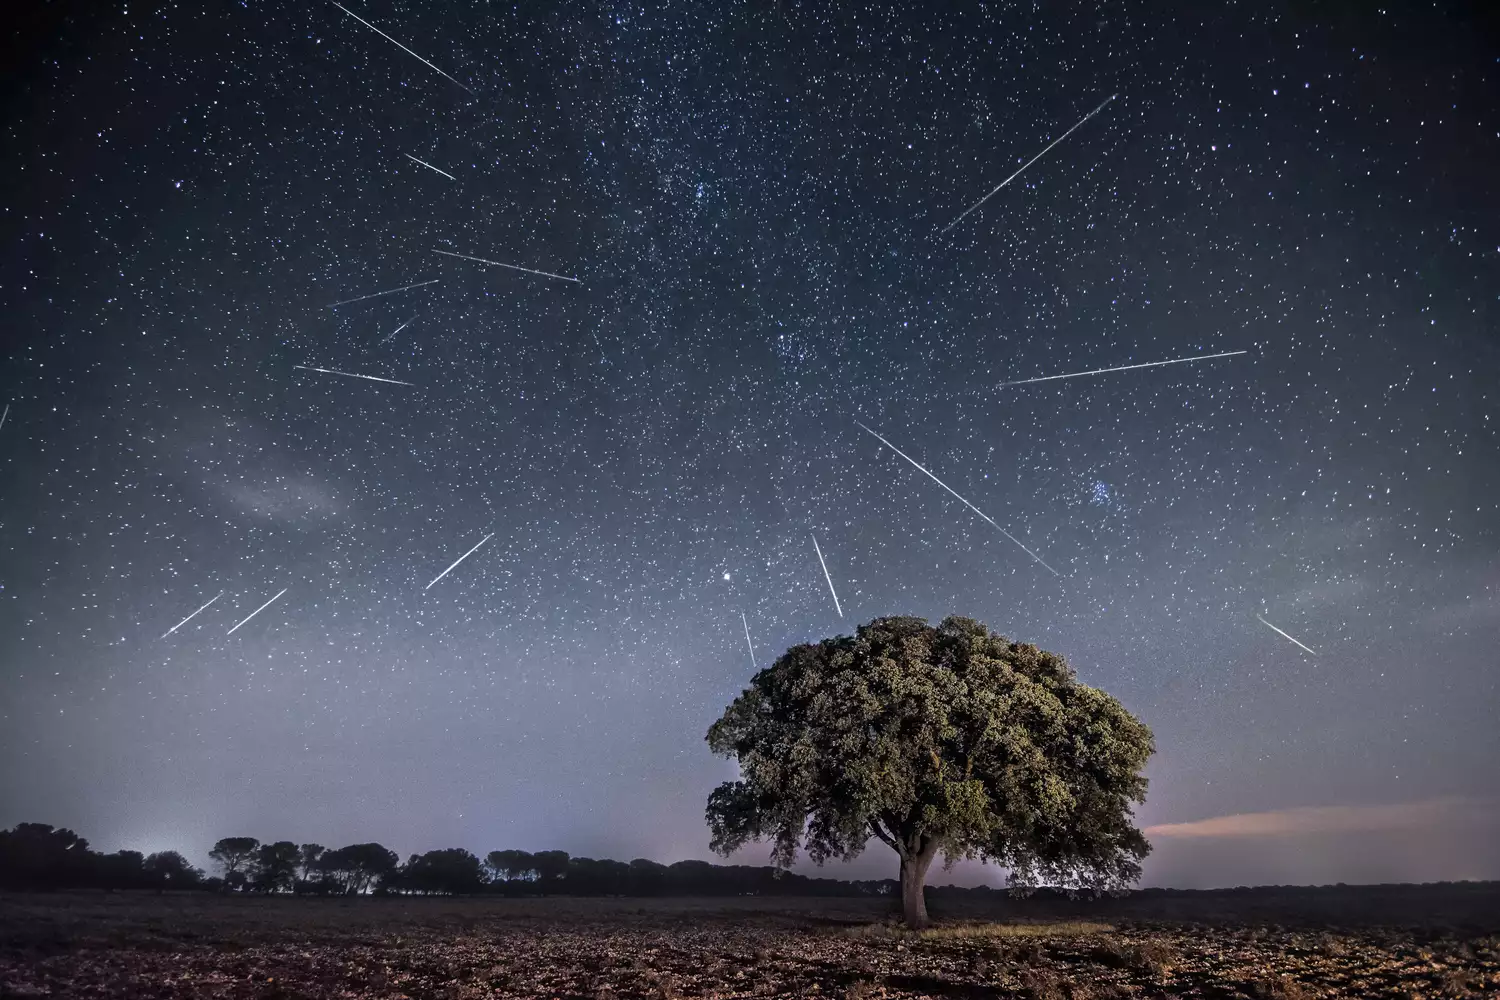 3 Meteor Showers Will Be Visible in the Night Sky This Week—Here’s Where to Catch the Flurry of Shooting Stars